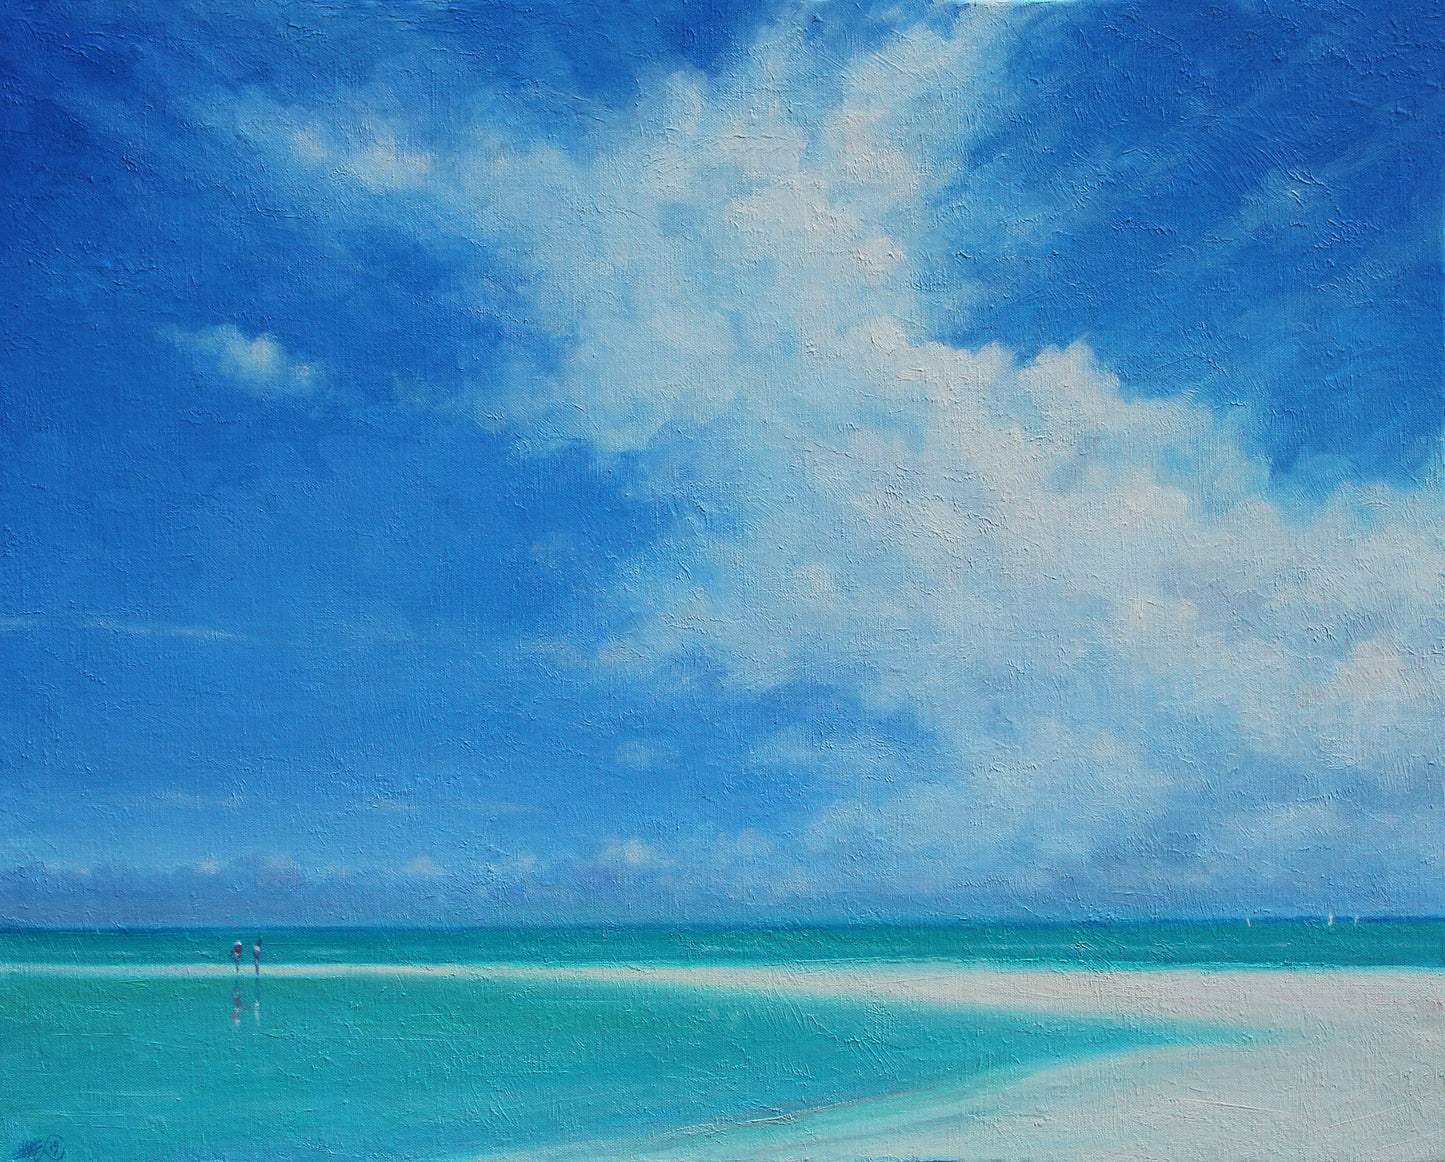 On The Shoreline.30ins x 24ins.2019. Seascape painting by Derek Hare